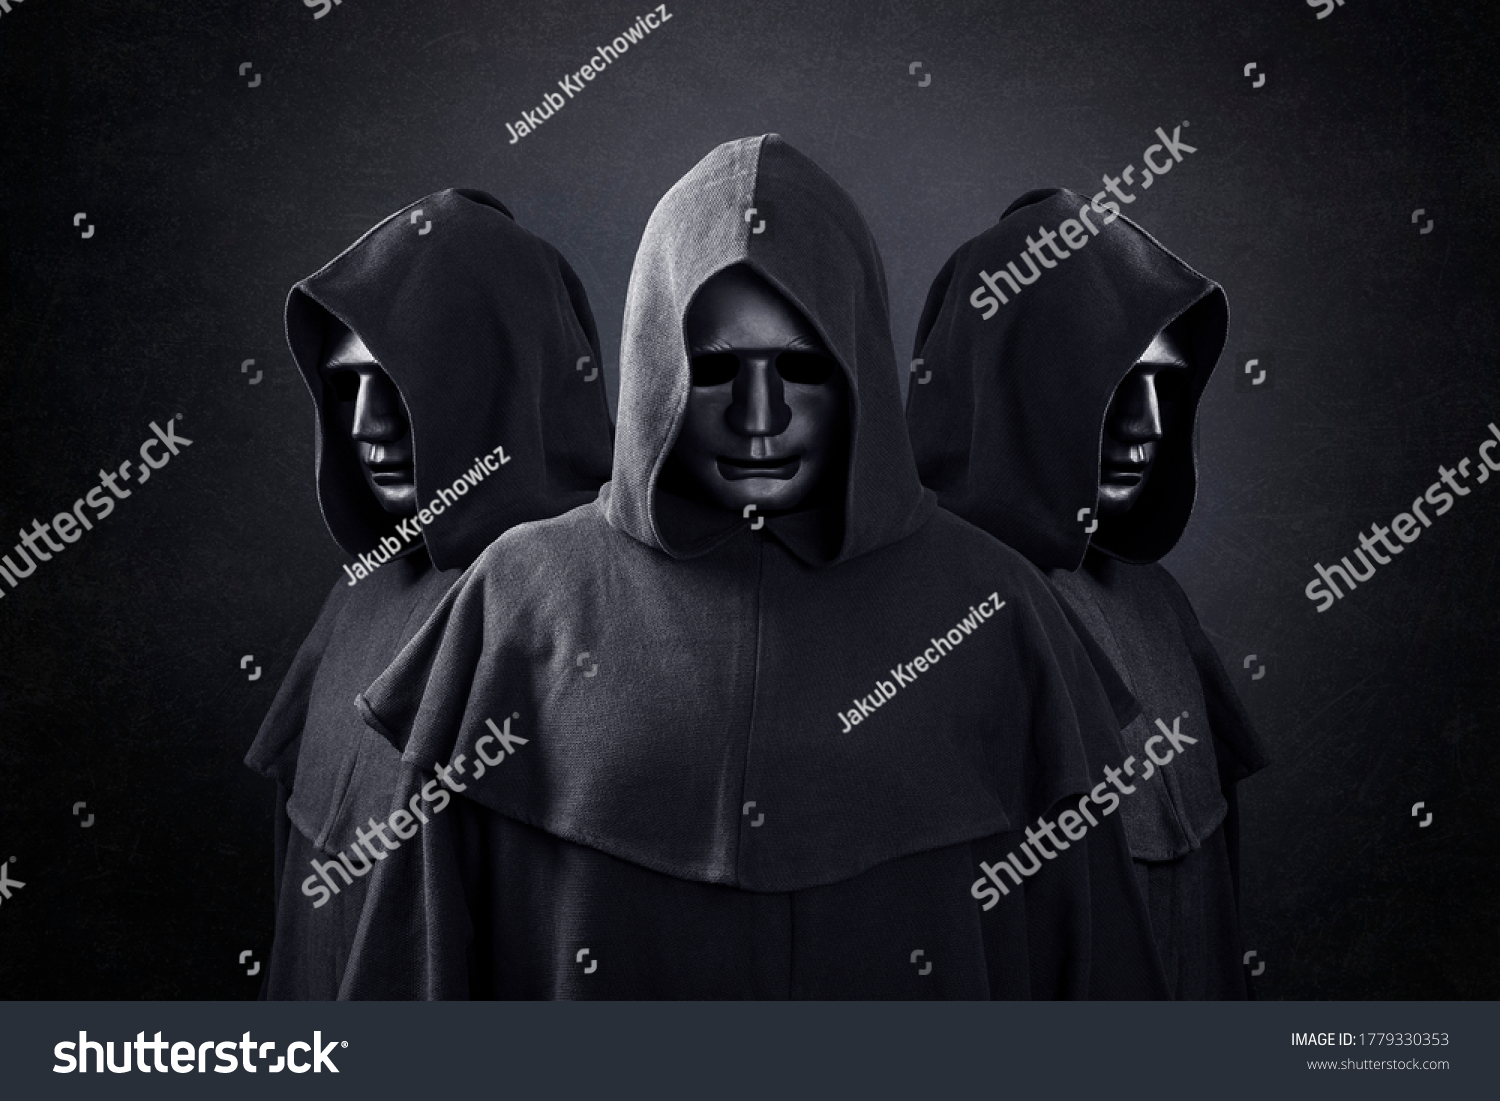 Group of three scary figures in hooded cloaks in the dark #1779330353